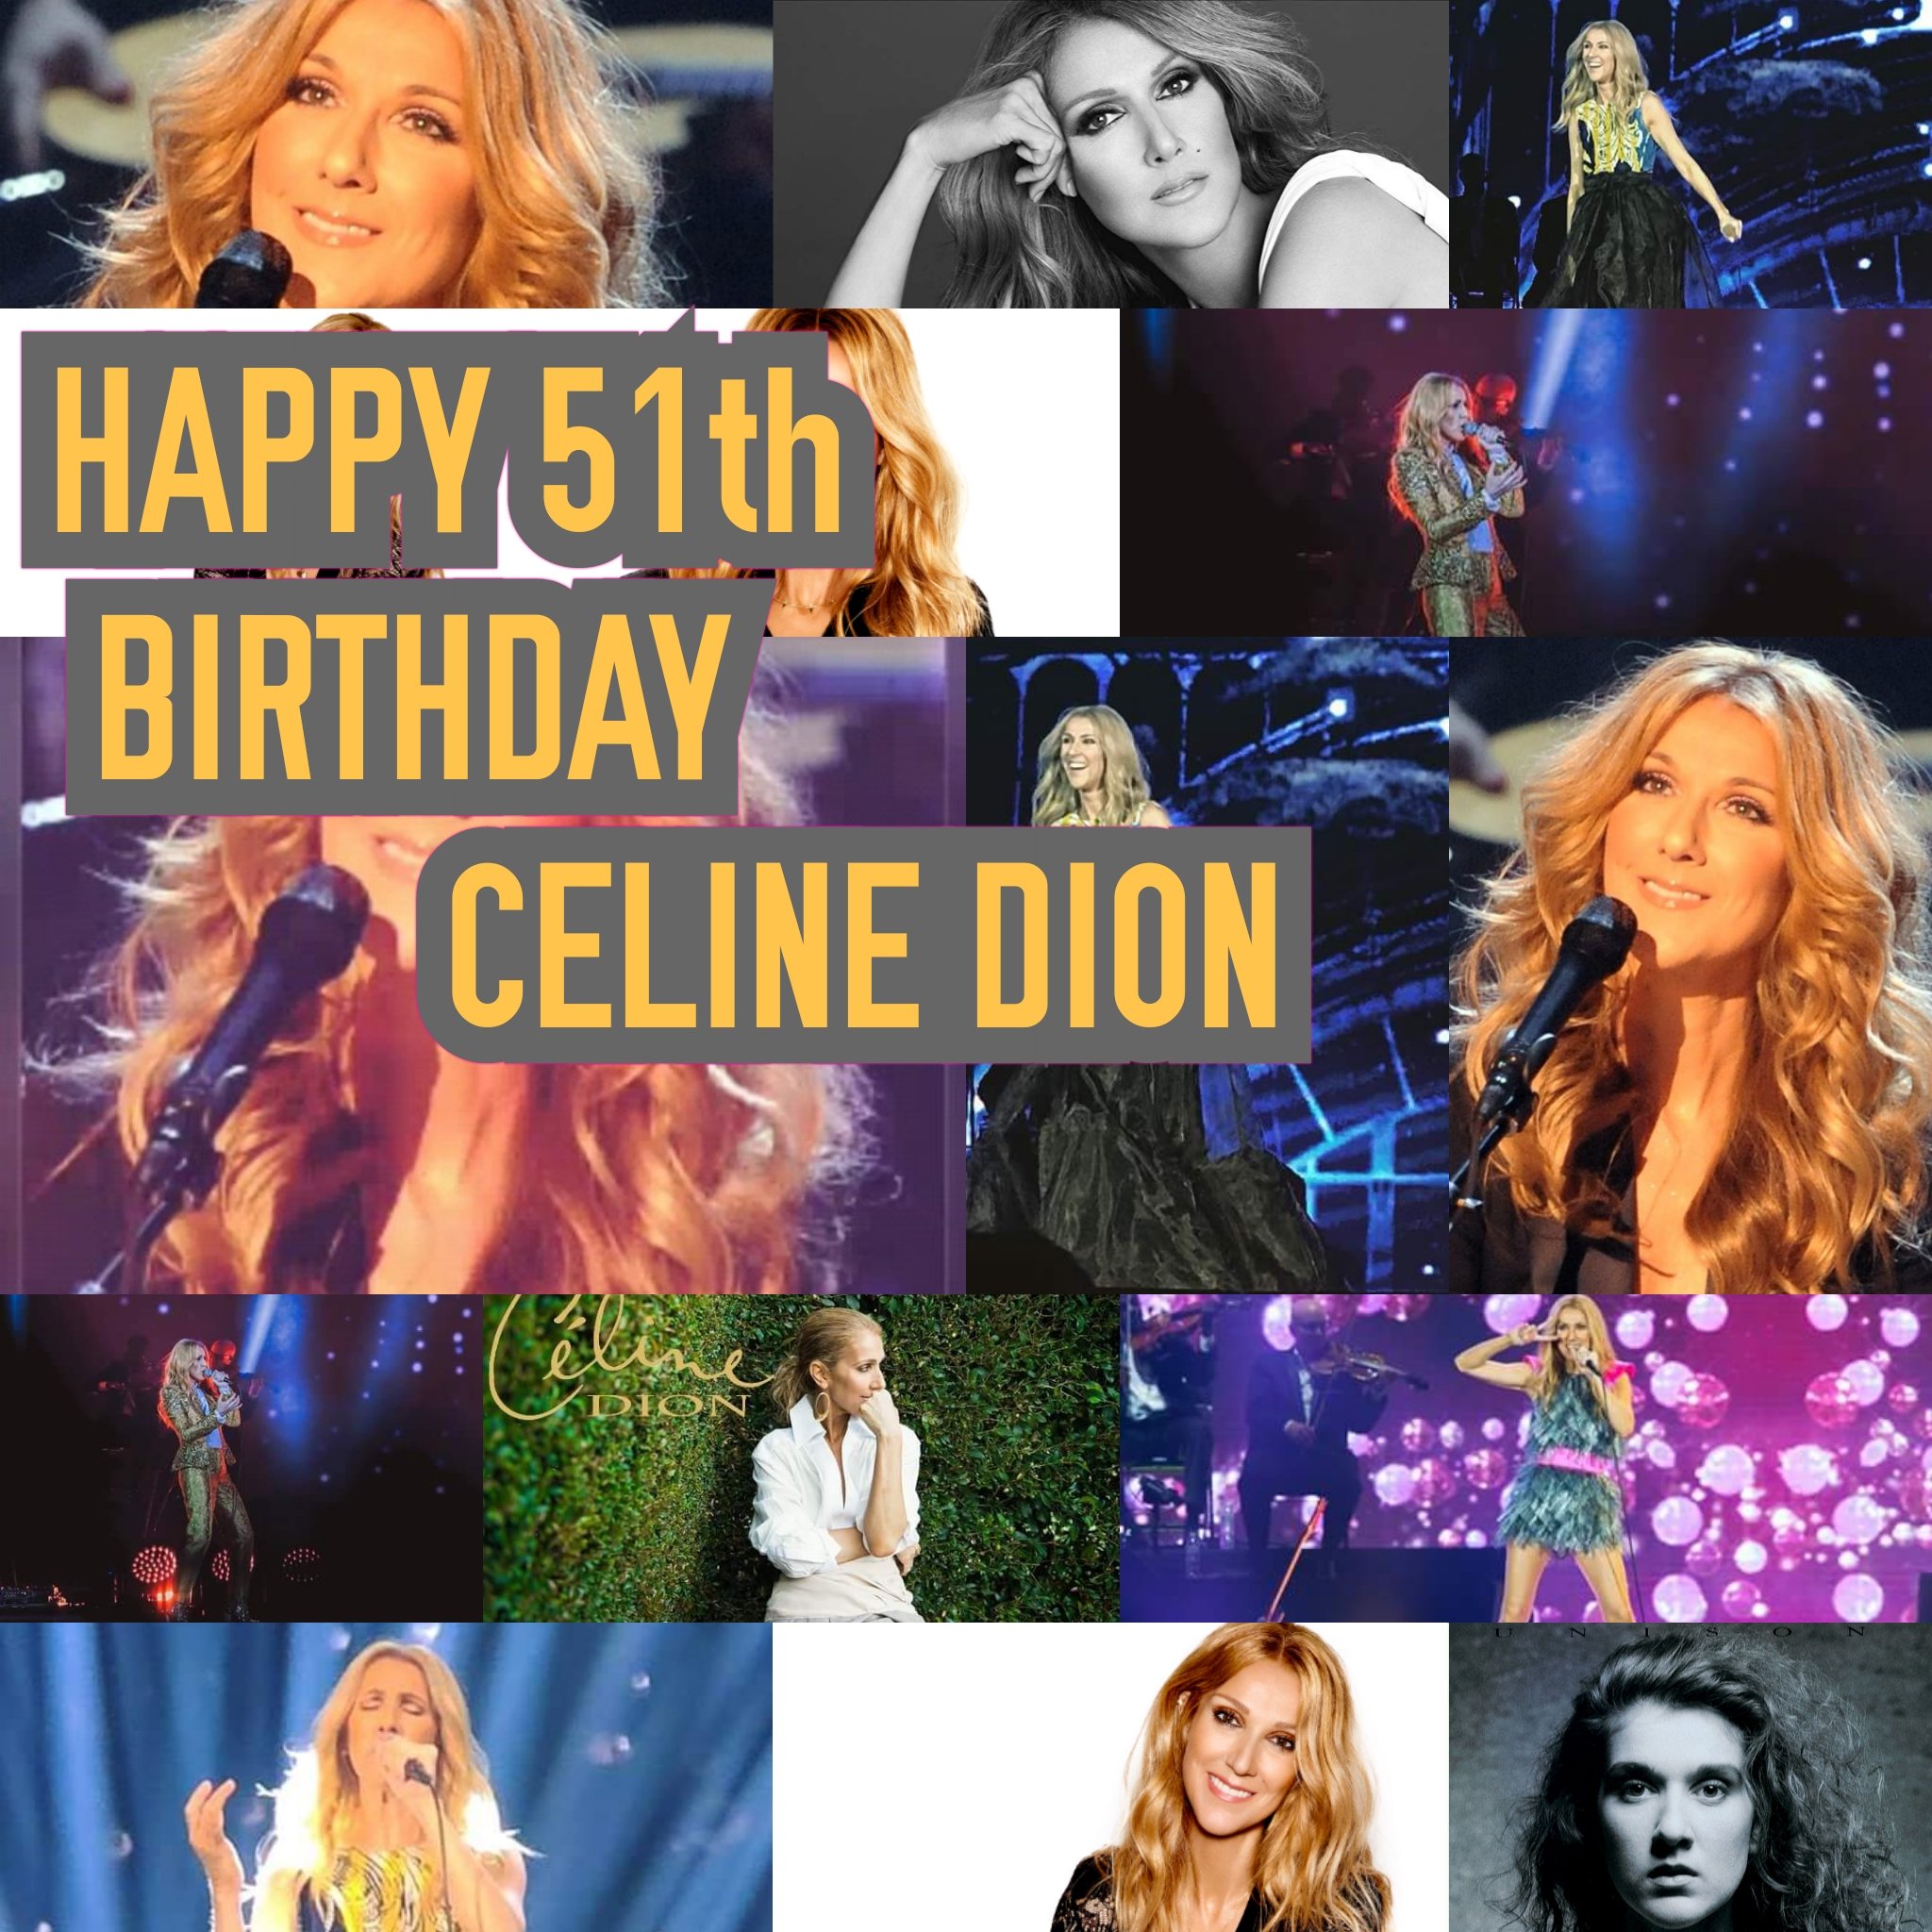 Happy 51st birthday celine dion
God bless you and more blessings to come for you and your family      